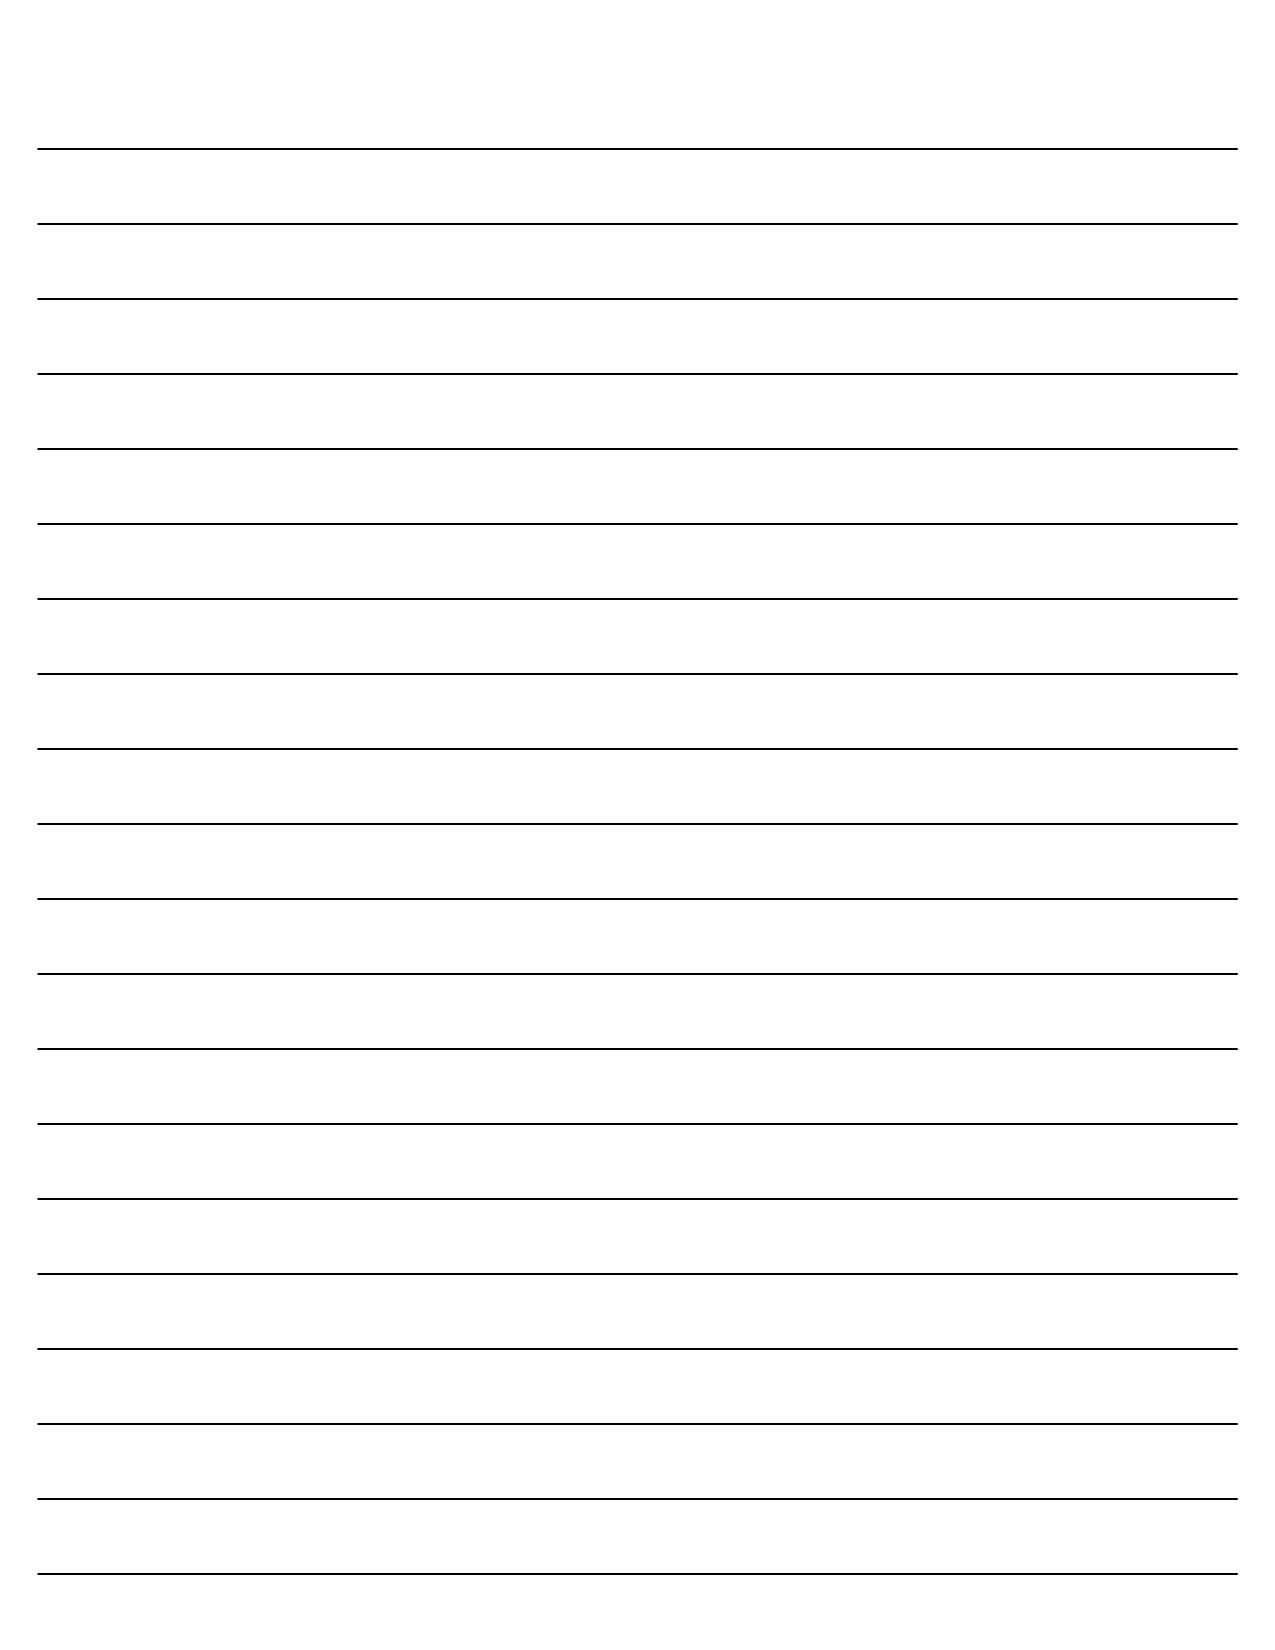 Free Printable Lined Paper For Handwriting - Get What You Need